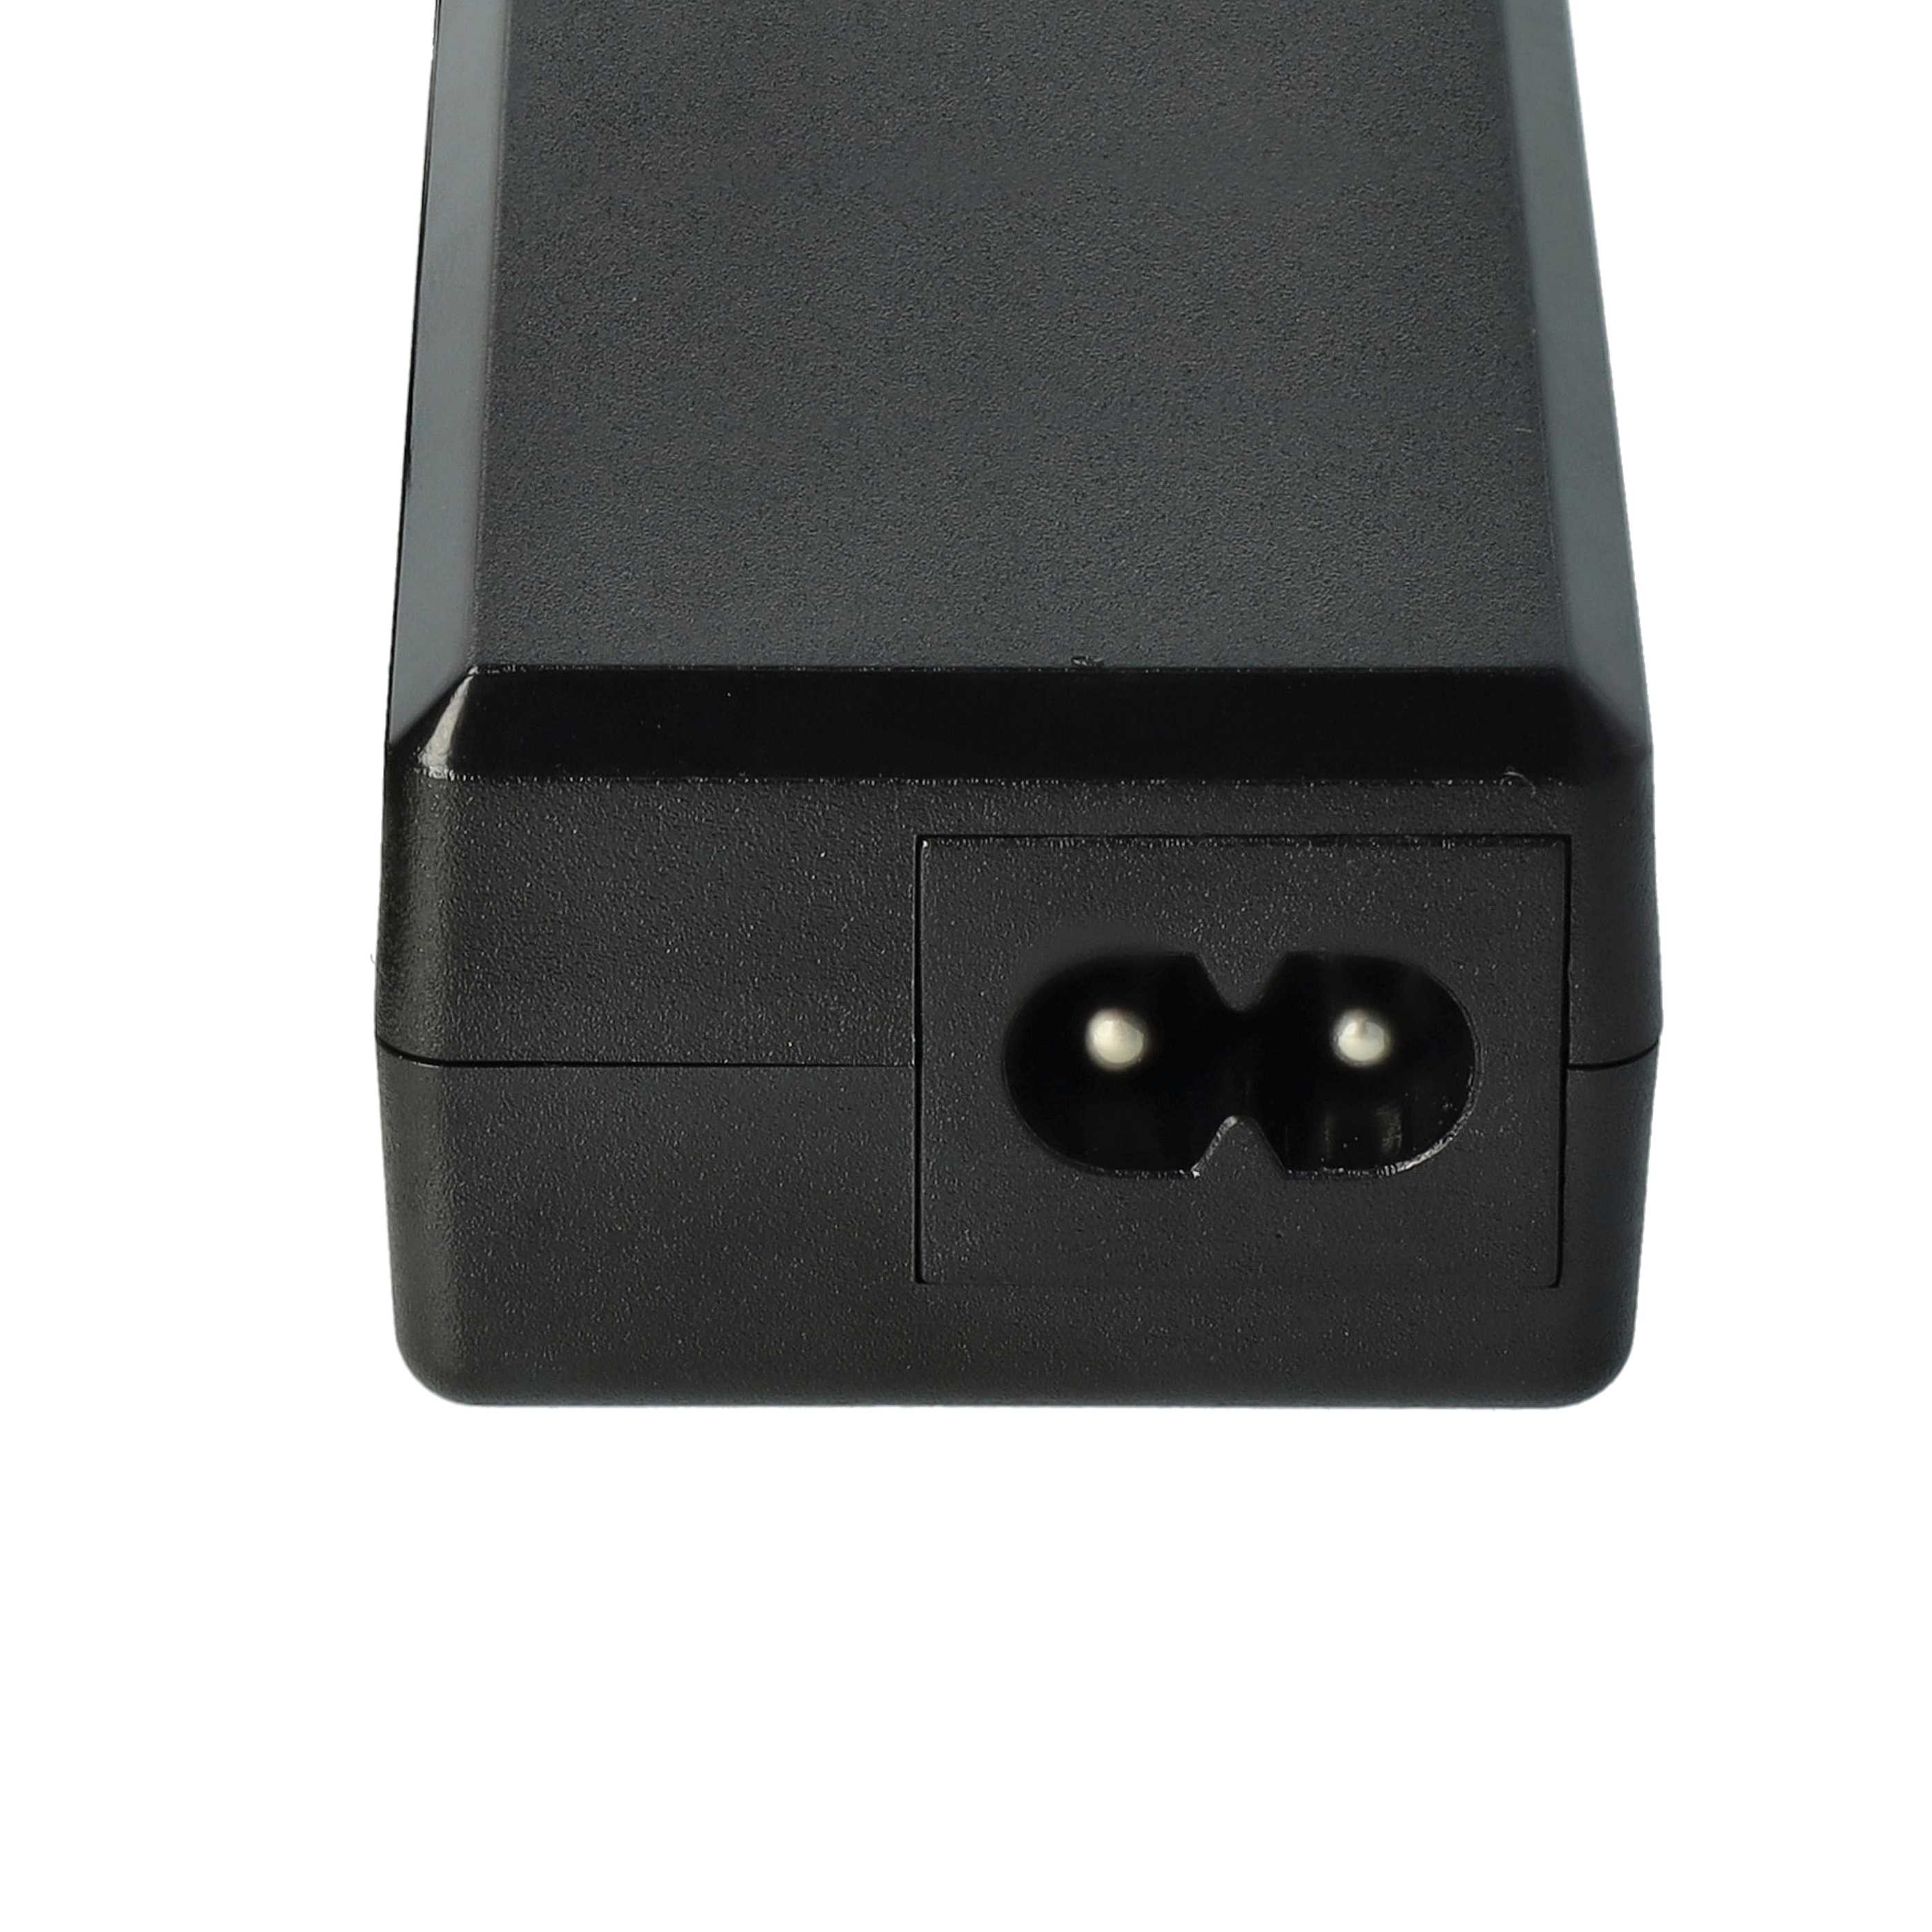 Mains Power Adapter replaces Apple 661-3049, ACG4, 661-2790, 661-2736, A1036, 661-3345 for AppleNotebook, 36 W